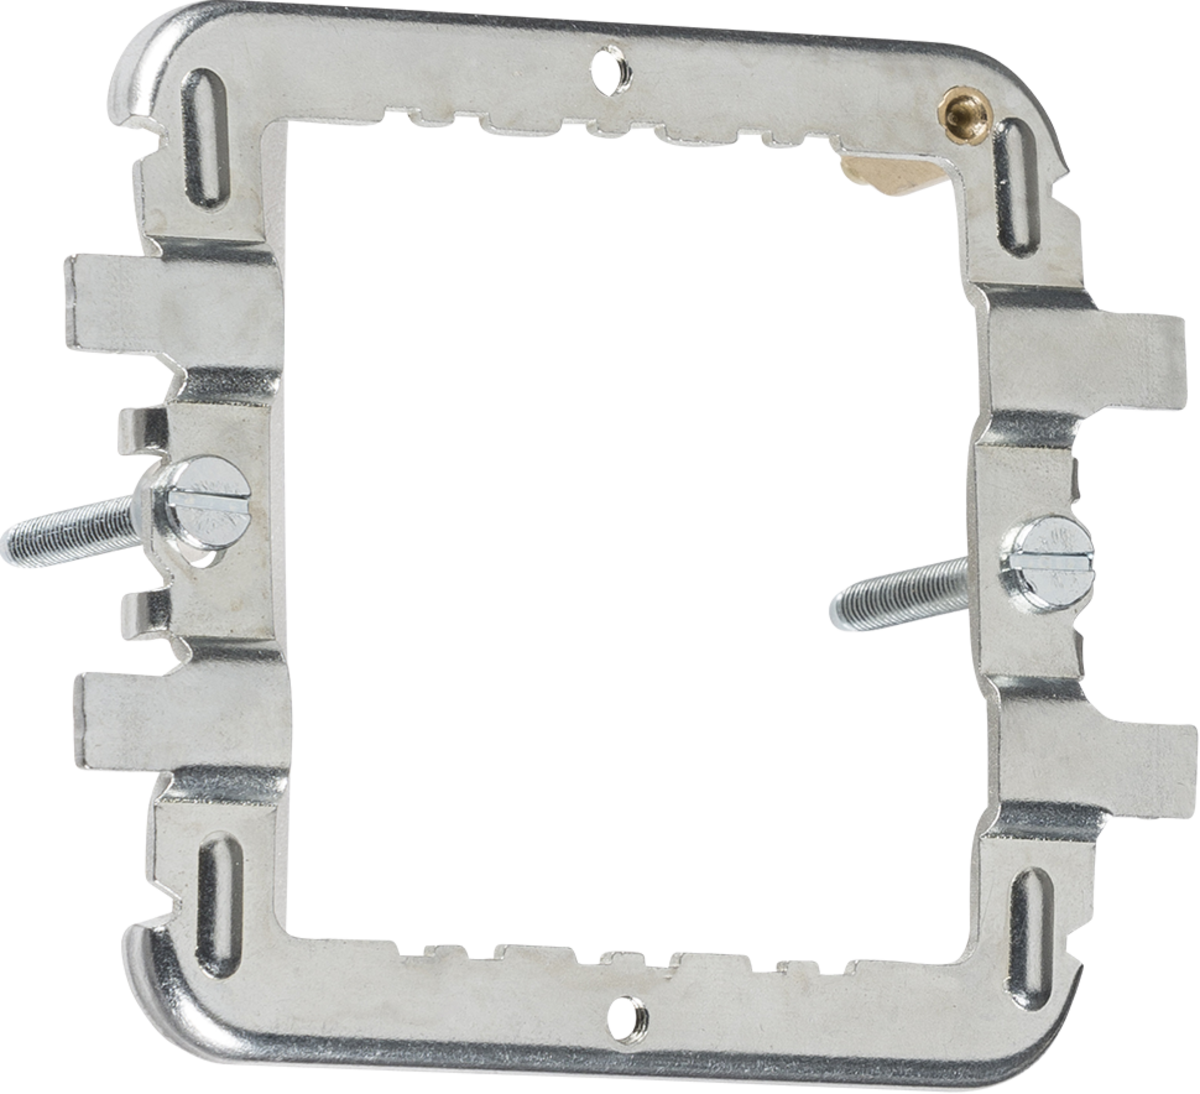 1-2G grid mounting frame for Flat Plate, Raised Edge & Metalclad